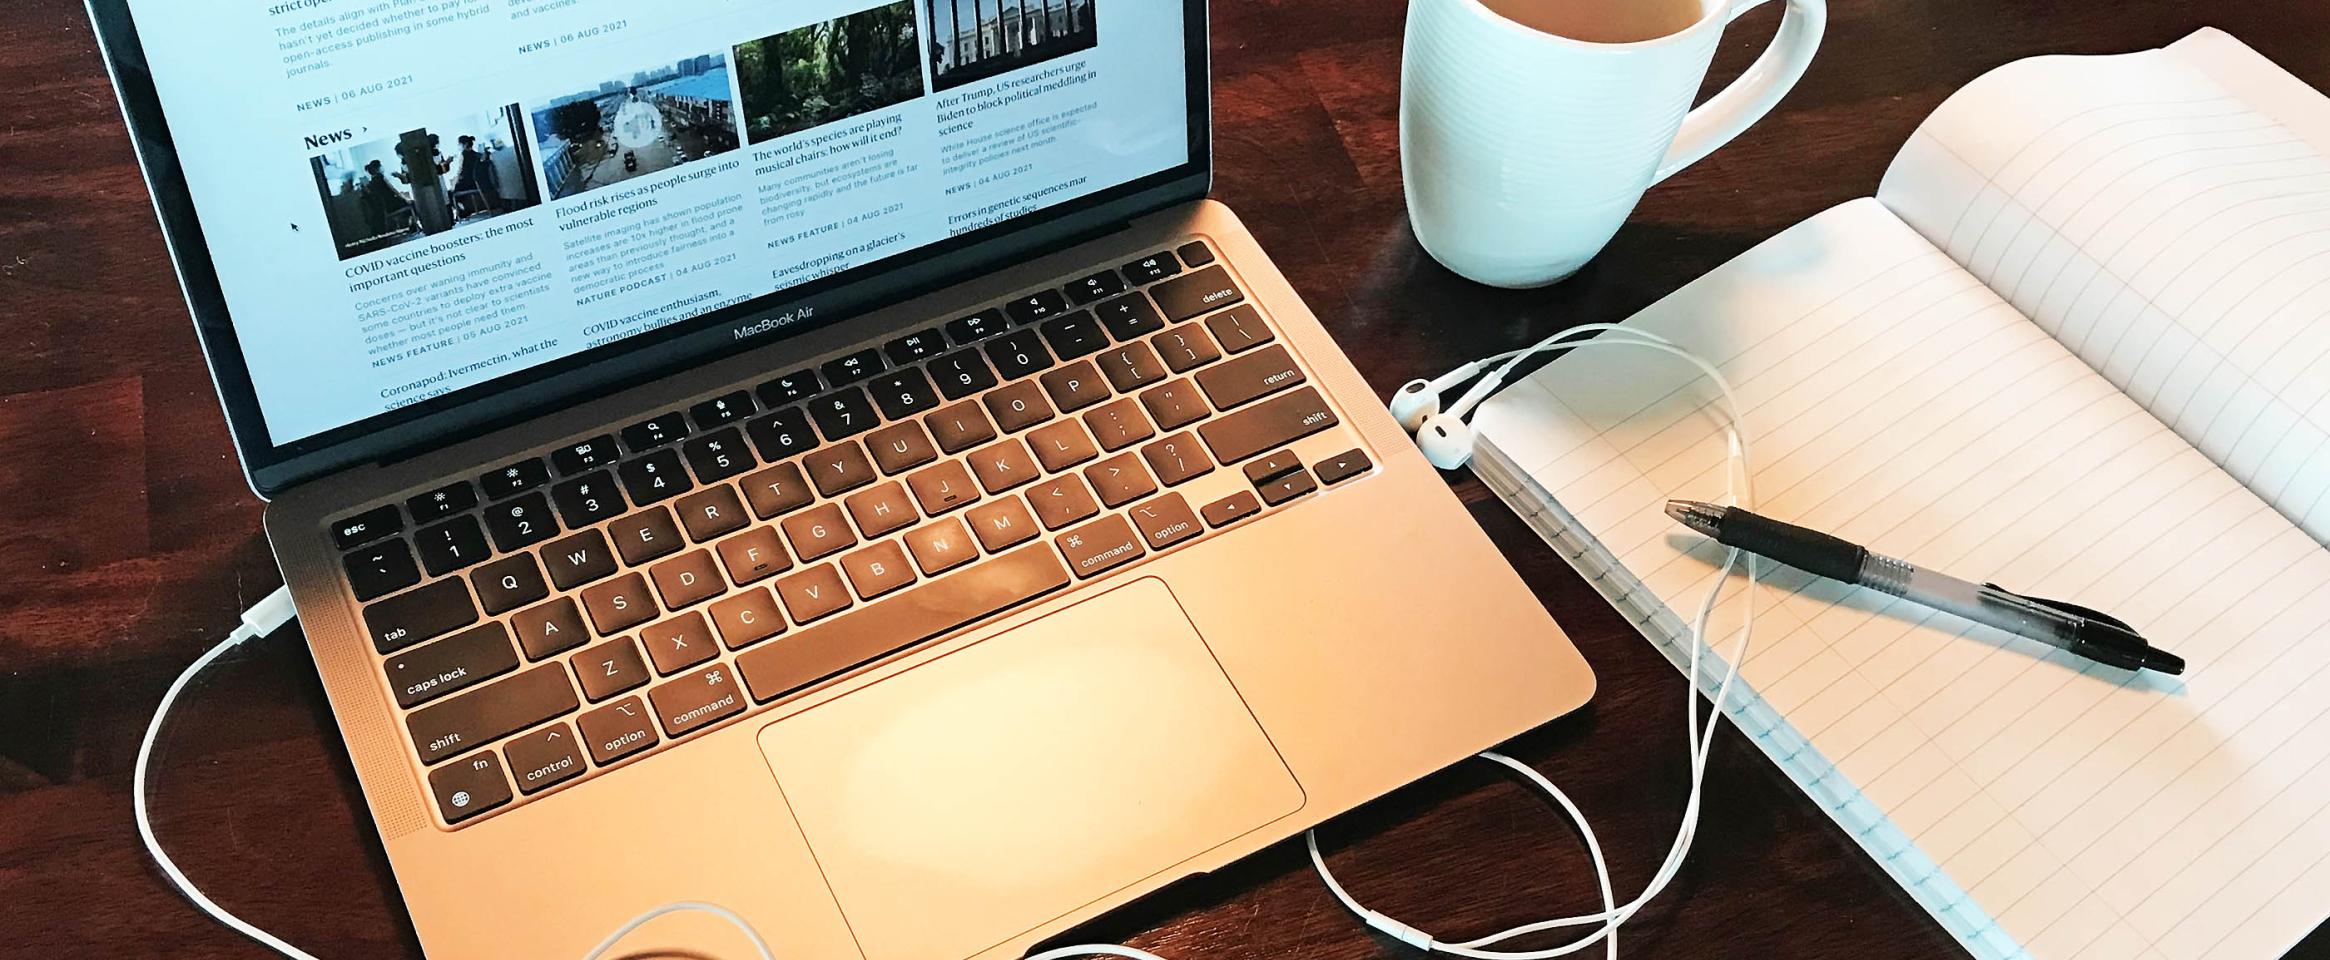 Horizontal photo of a laptop open on a wood grain desk, staged with headphone cords, an open notebook, pen, and mug. Original photo credit Alex Witze.